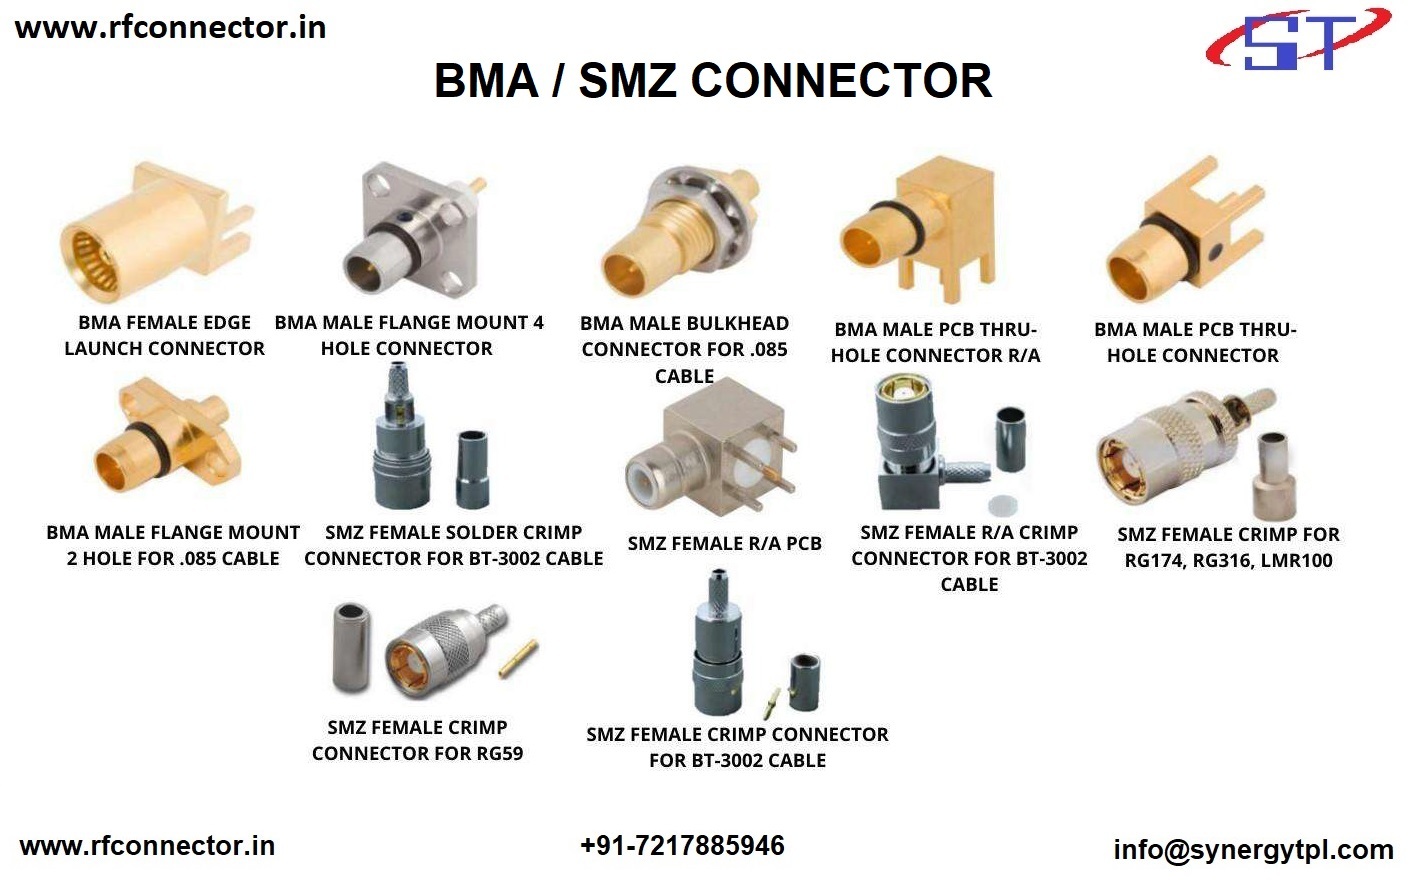 BNC male crimp connector for BT3002 cable